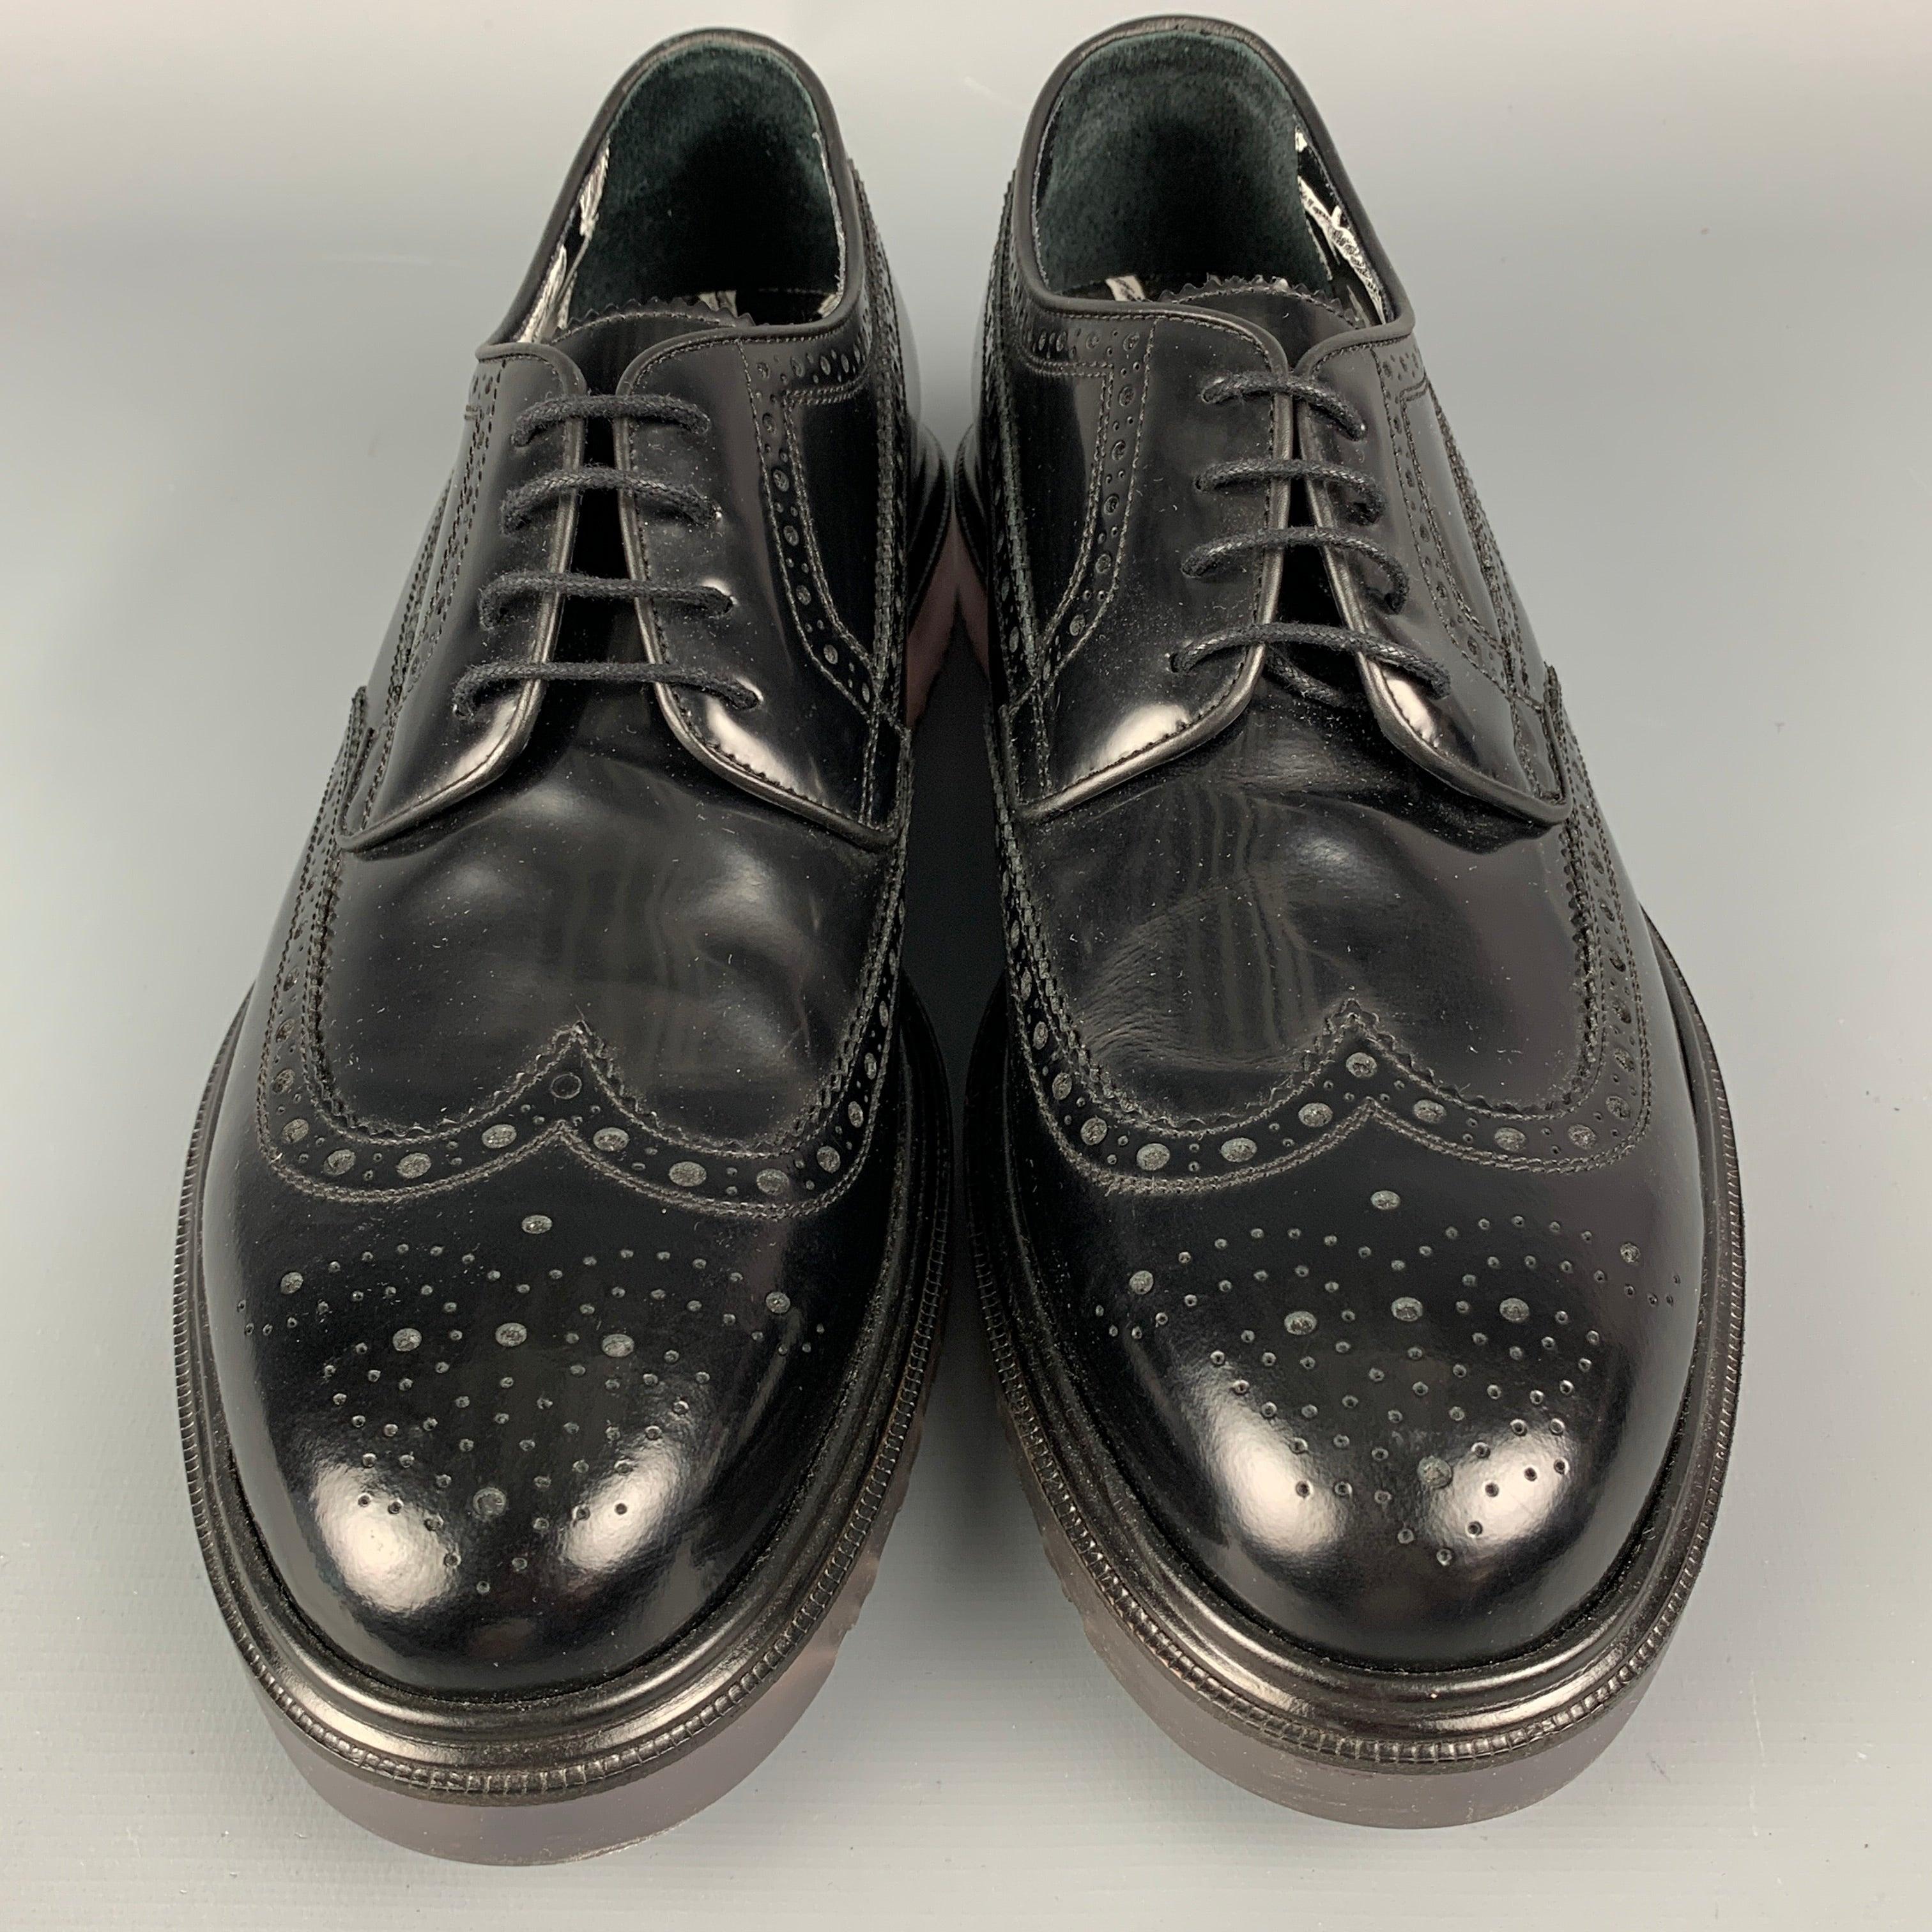 Men's PAUL SMITH Size 9 Black Perforated Leather Wingtip Lace Up Shoes For Sale